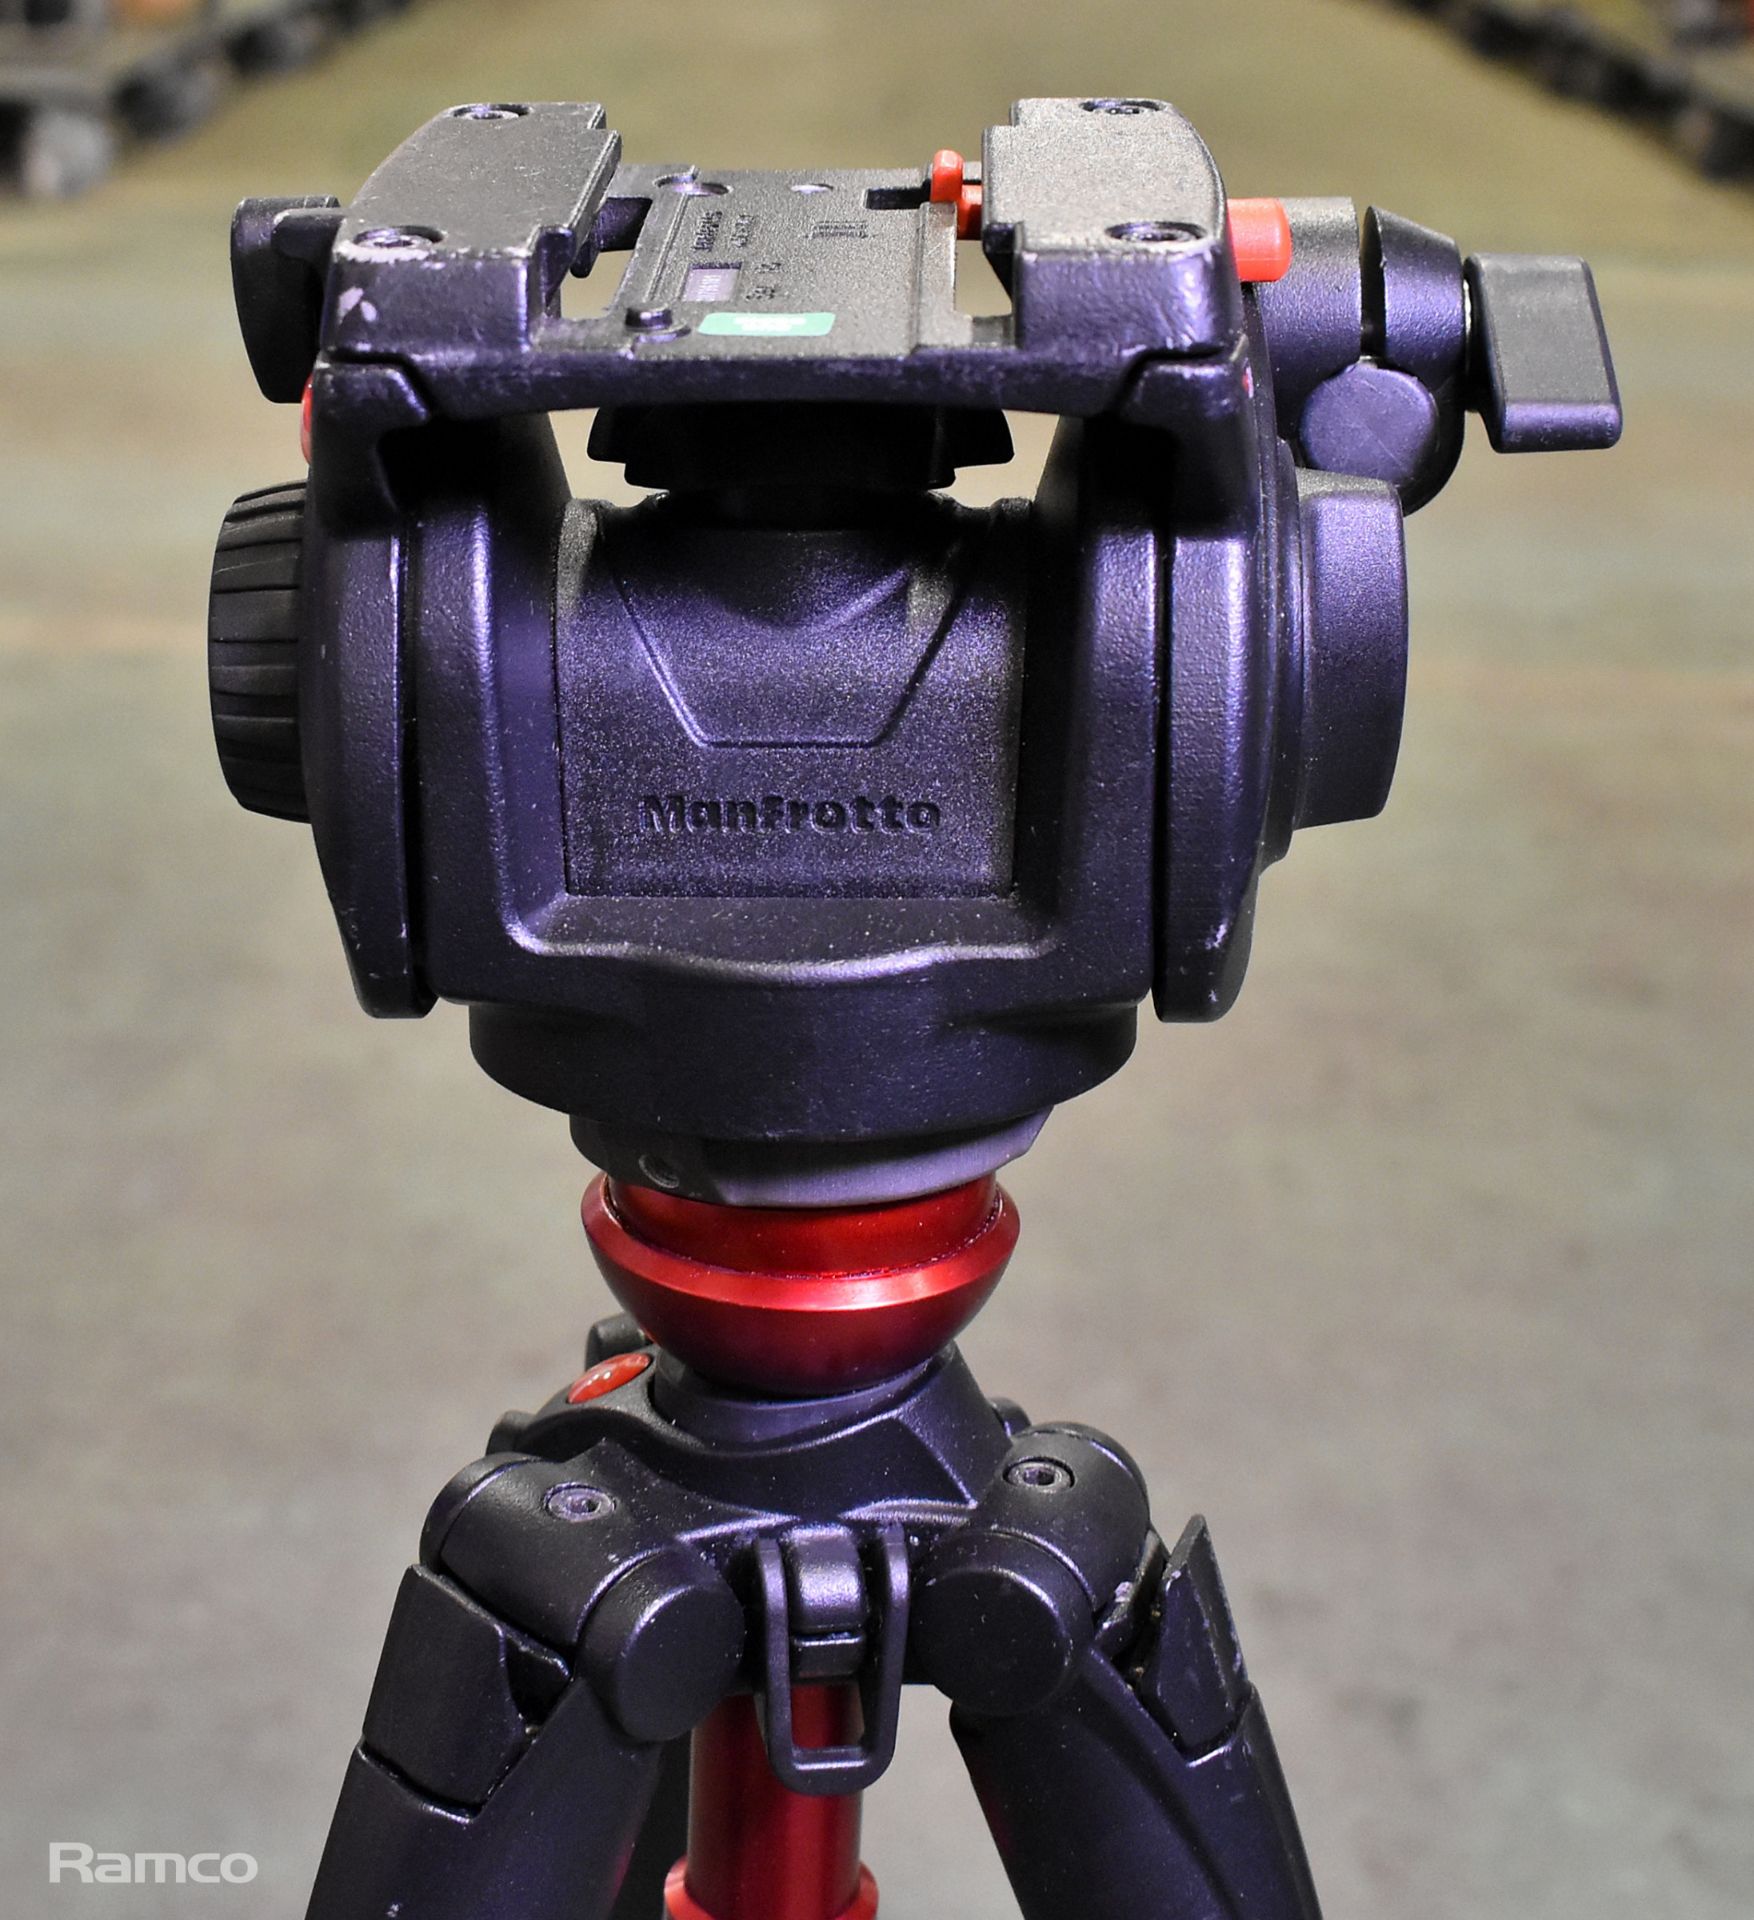 Manfrotto 501HDV head unit on a 745XB tripod with carry case - Image 5 of 8